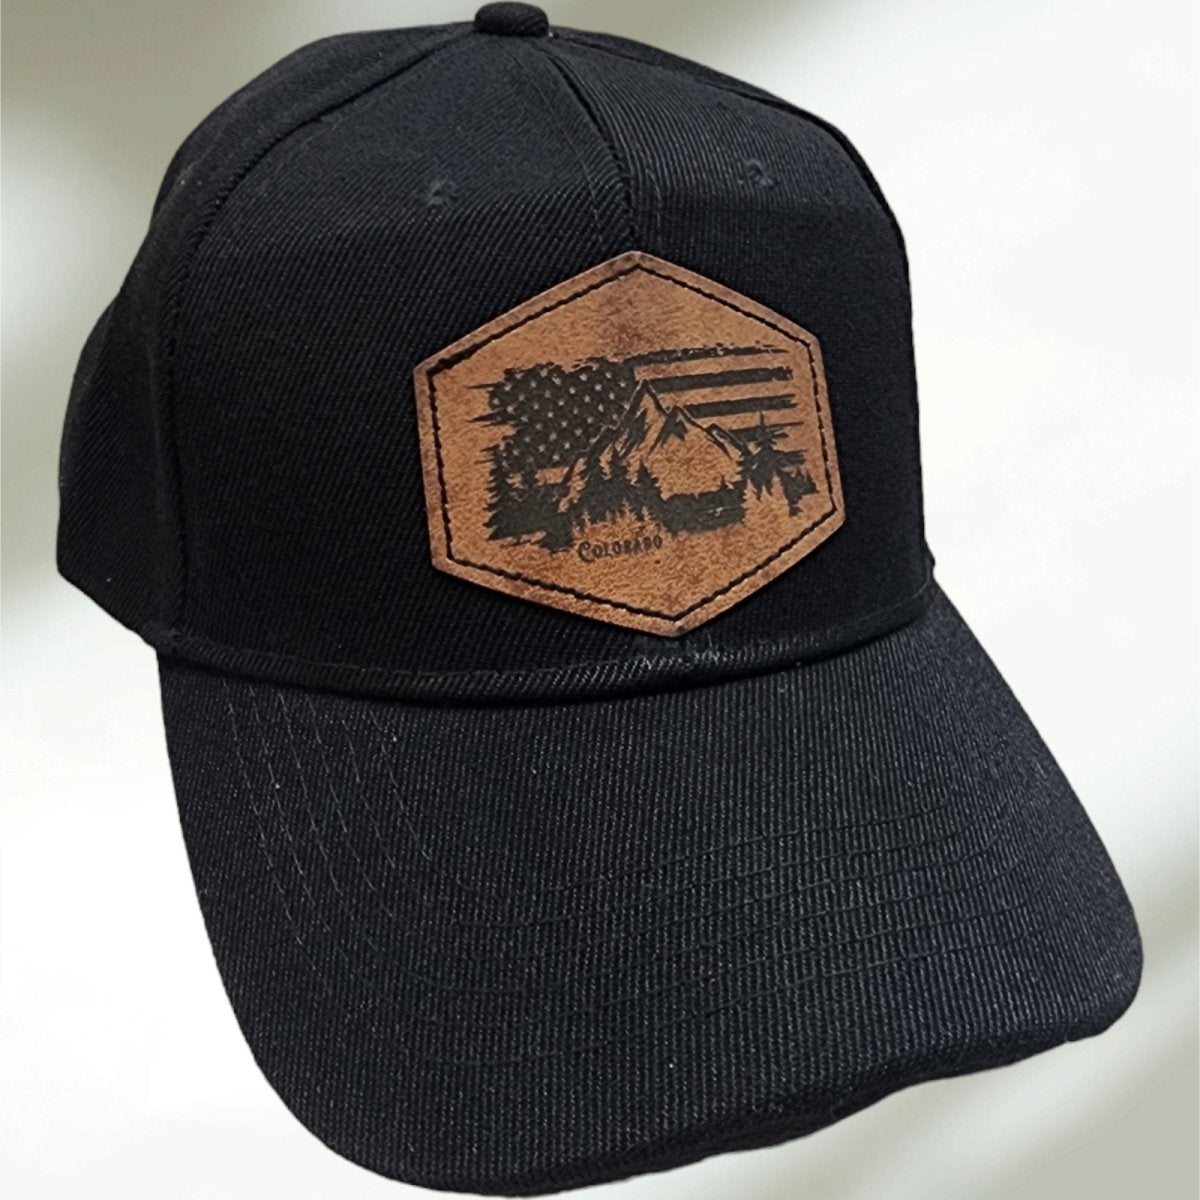 Leather Patches Emblems for Hats Jackets Clothing and more - Hats Signs Patches 3D printing Engraving